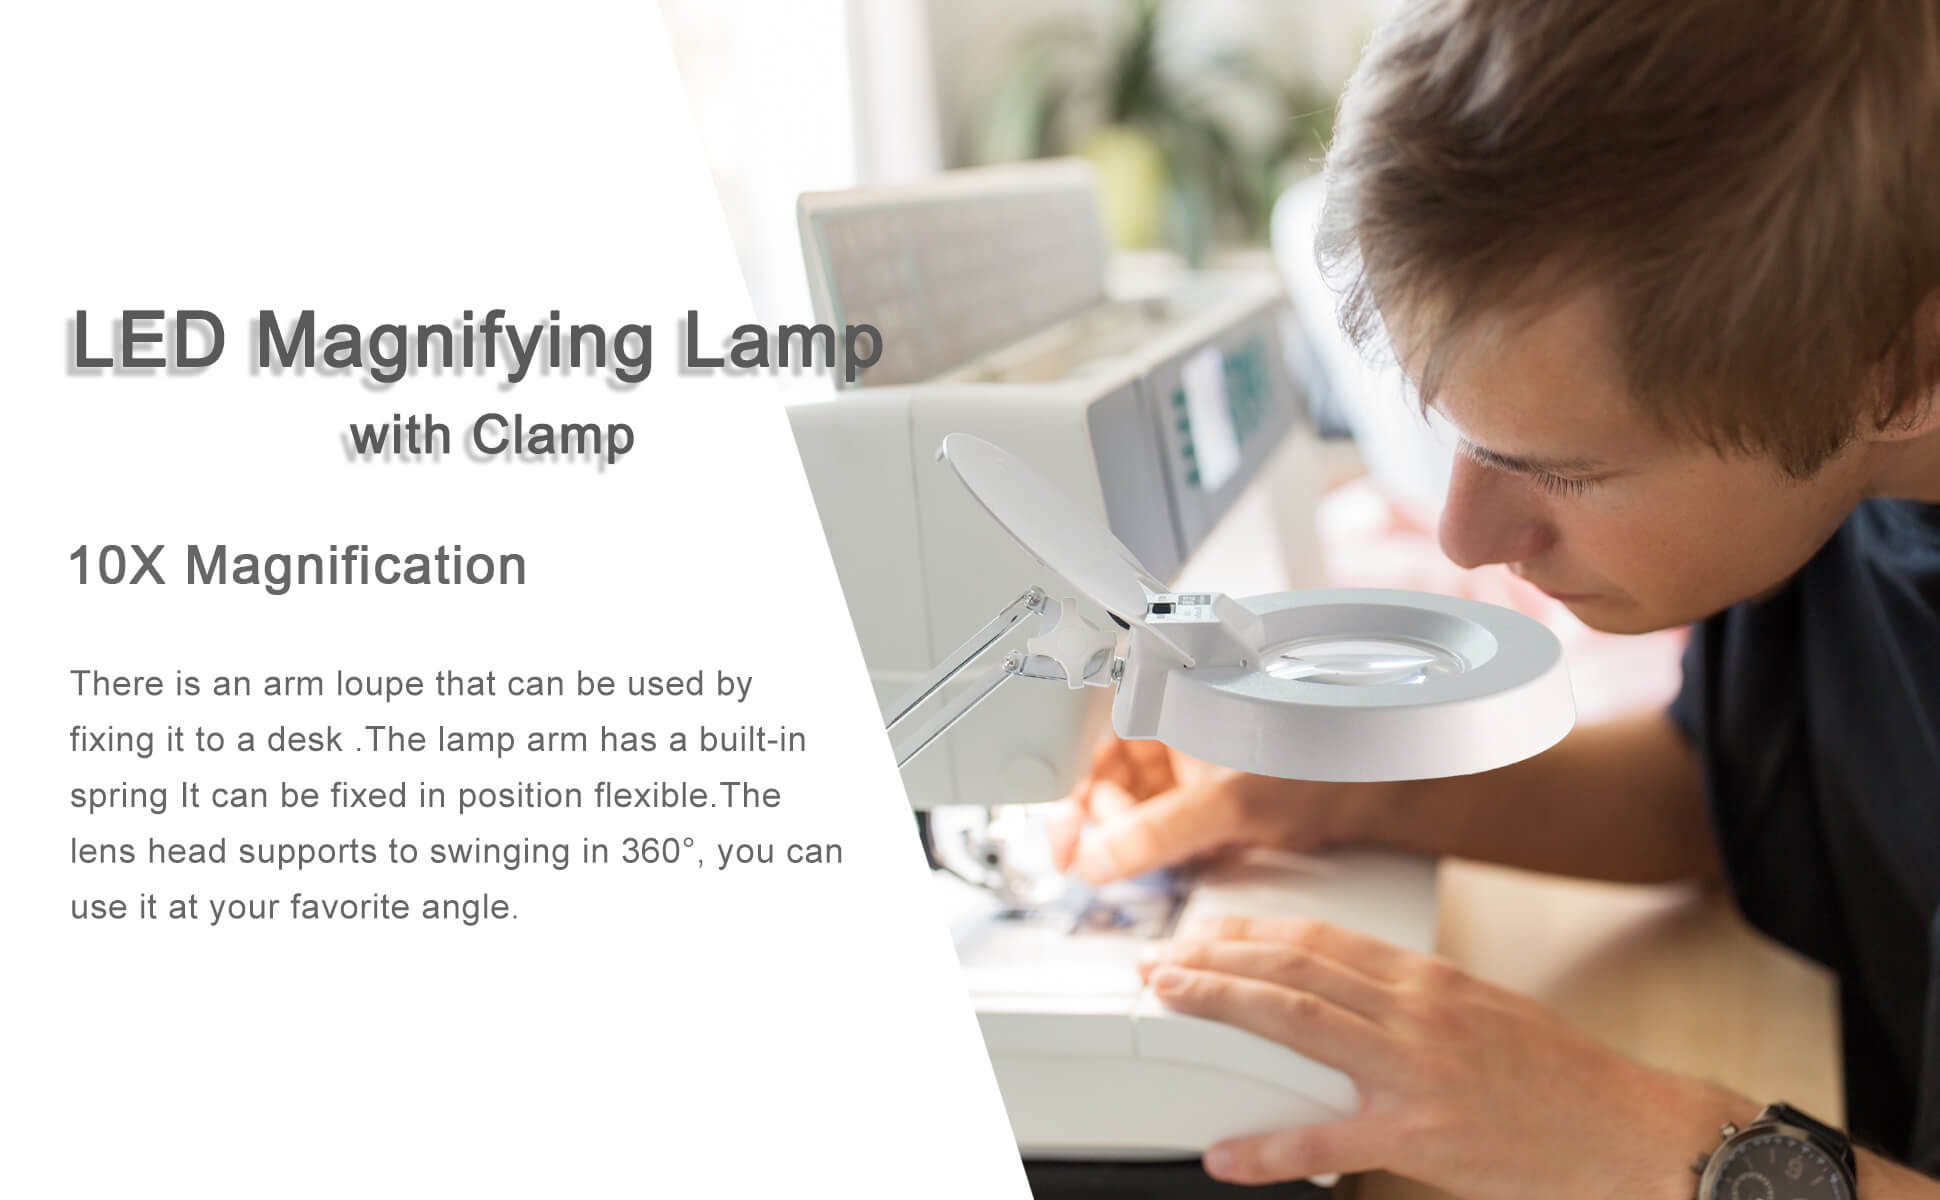 Gynnx Magnifying Lamp, Dimmable 10x Magnifying Desk Lamp, 120 Pcs LED and 5 Inches Lens with Stainless Steel Arm (White)